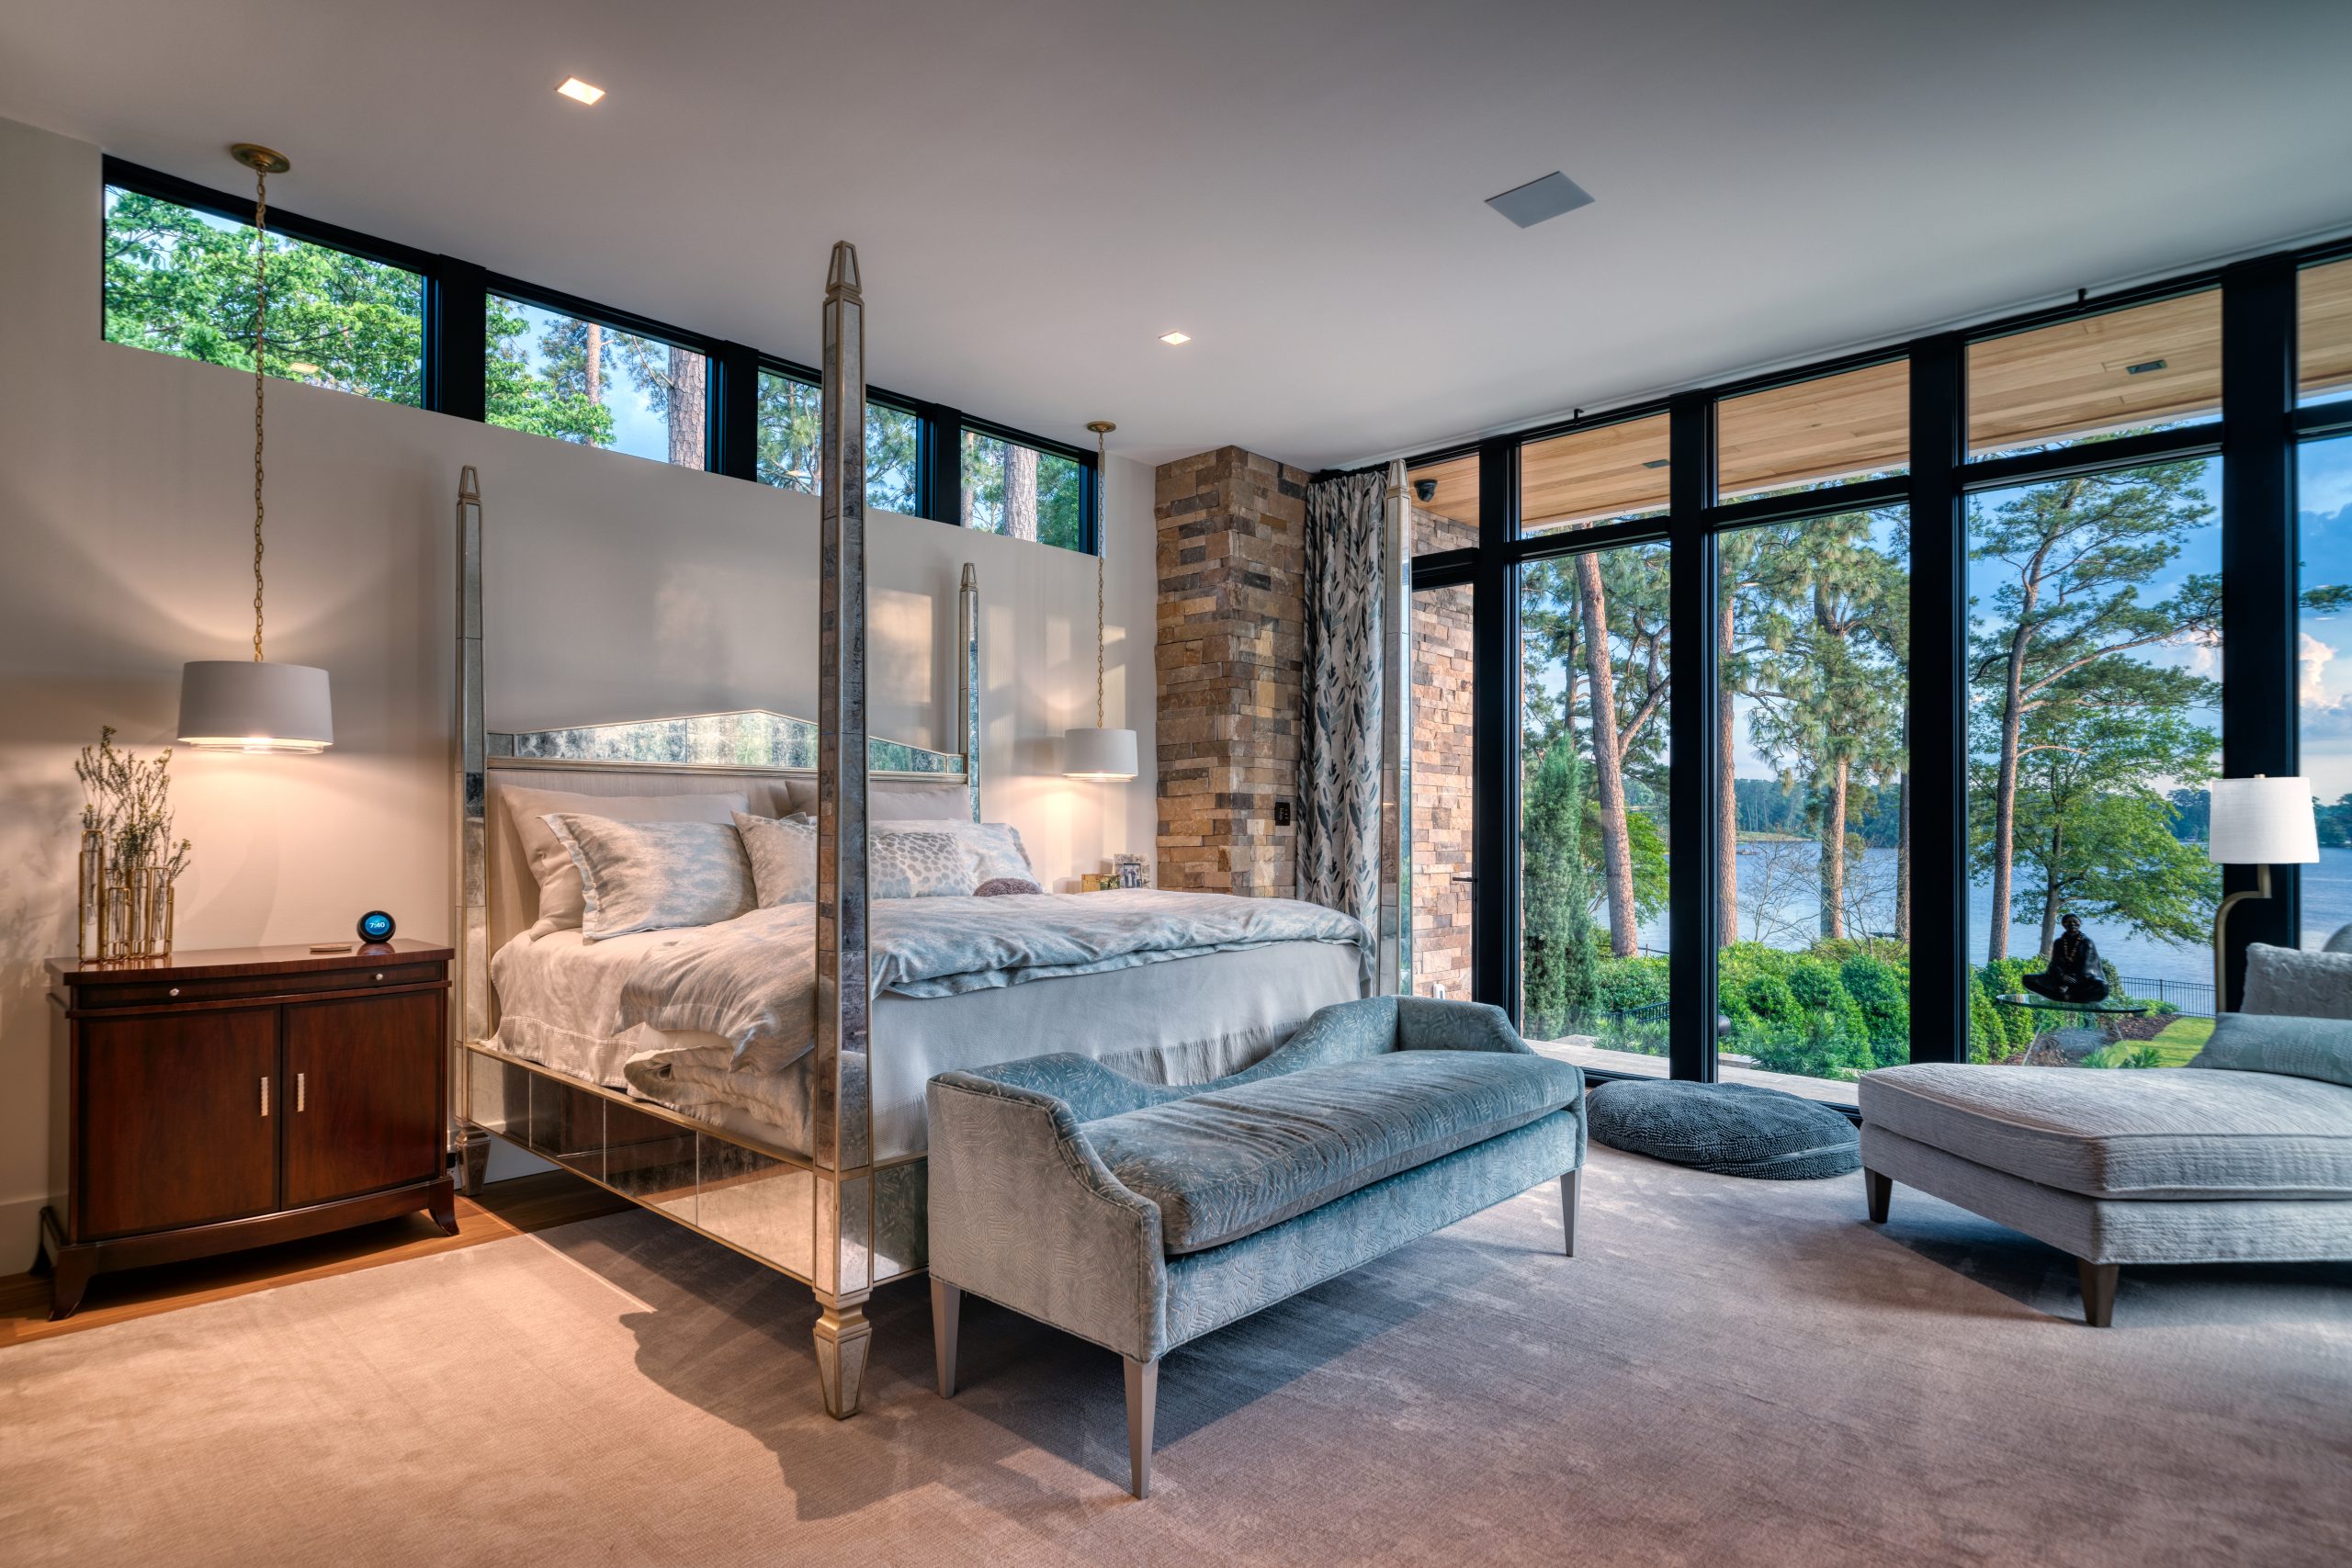 The master bedroom on the ground floor has a beautiful view of the lake and a stunning four-poster Venetian mirrored glass bed. A wide bench is what Kay calls Cleopatra and Jax’s launching pad to her bed, one of their favorite places in the house. 